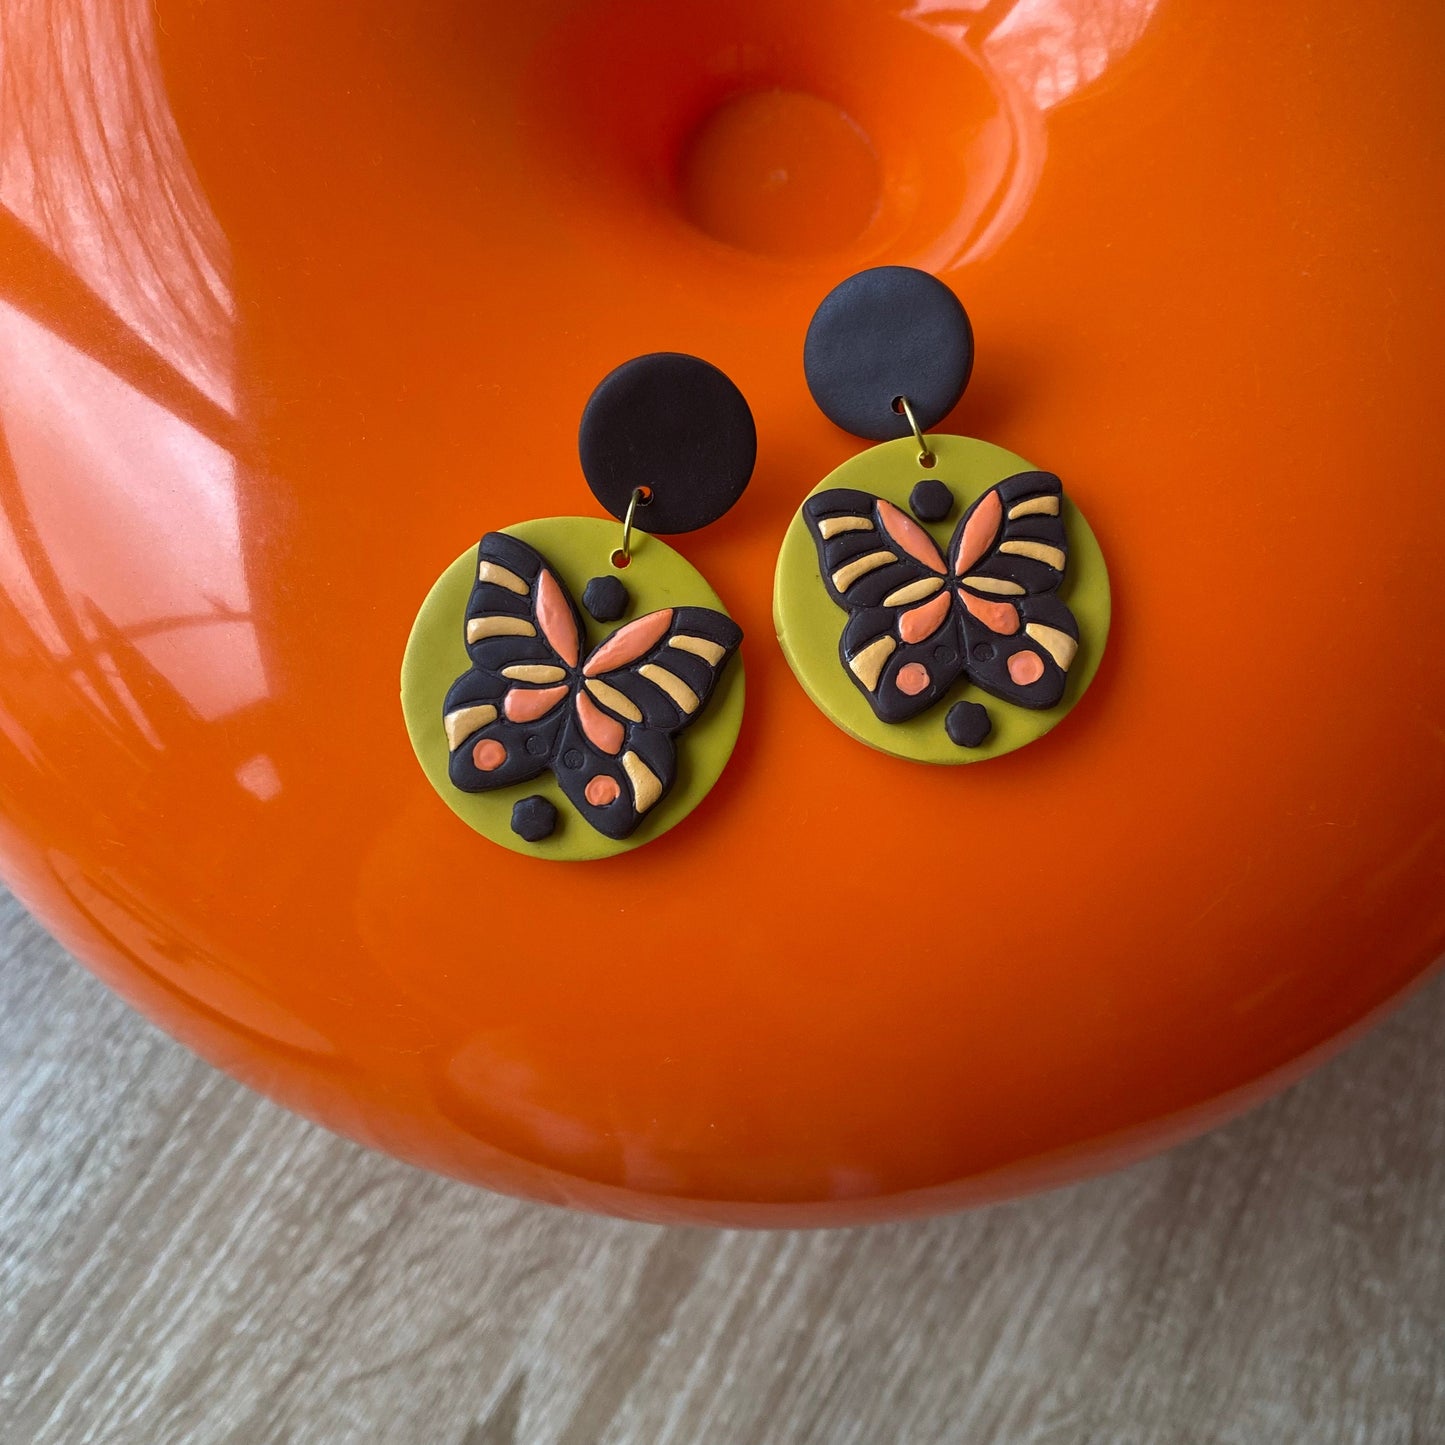 FLUTTERBY~ retro handmade and hand painted 60s boho butterfly earrings handmade polymer clay earrings